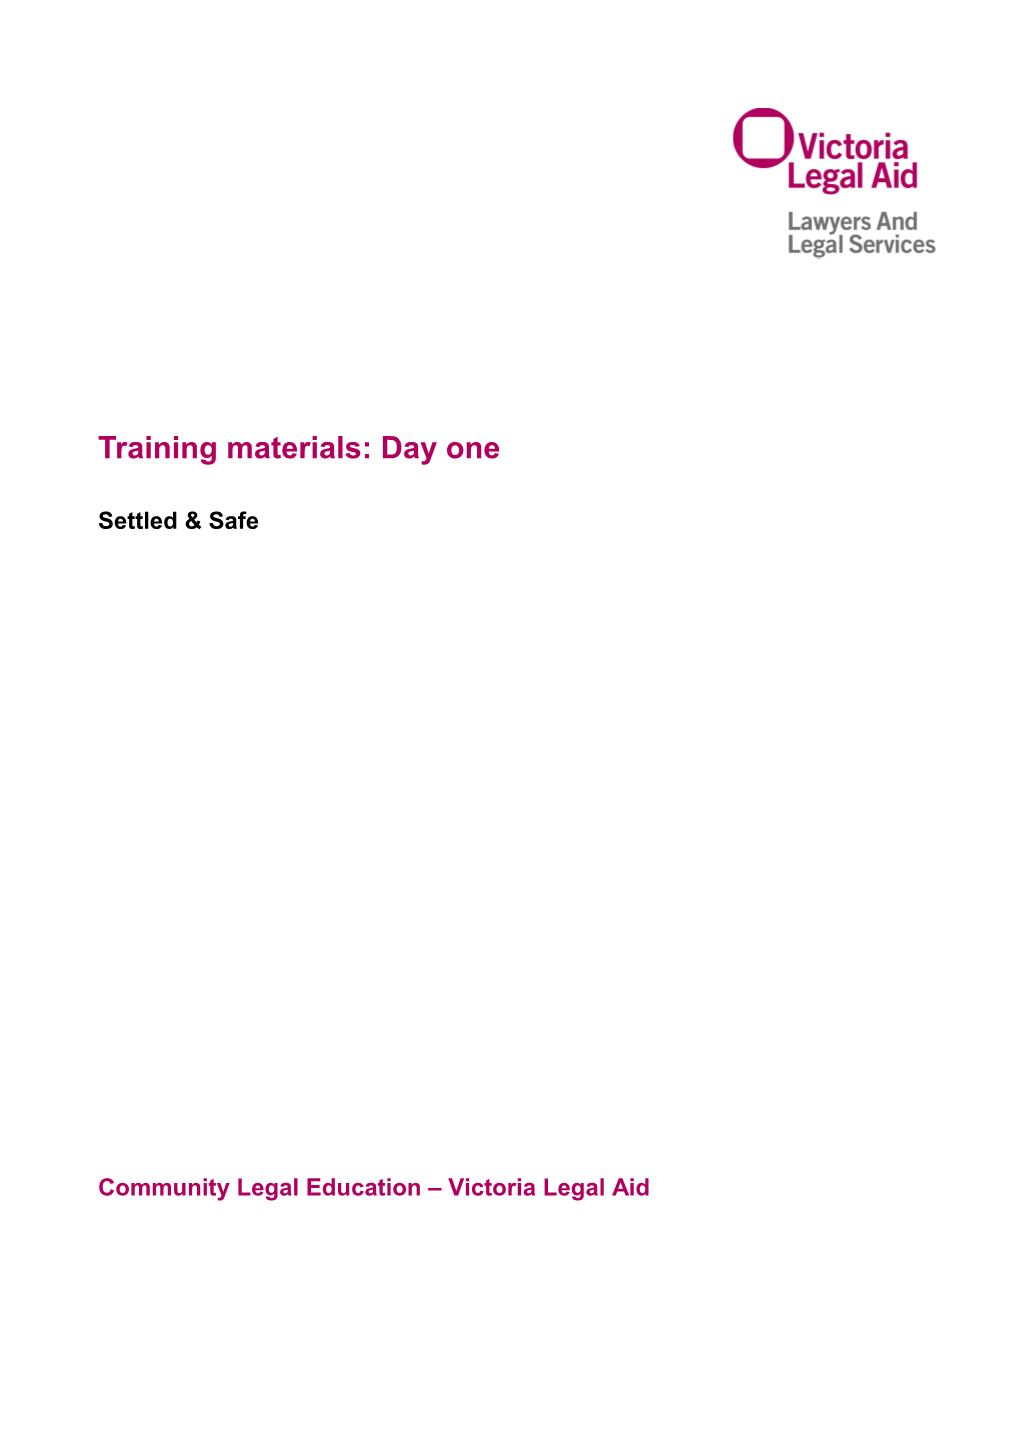 Settled & Safe Training Materials: Day One